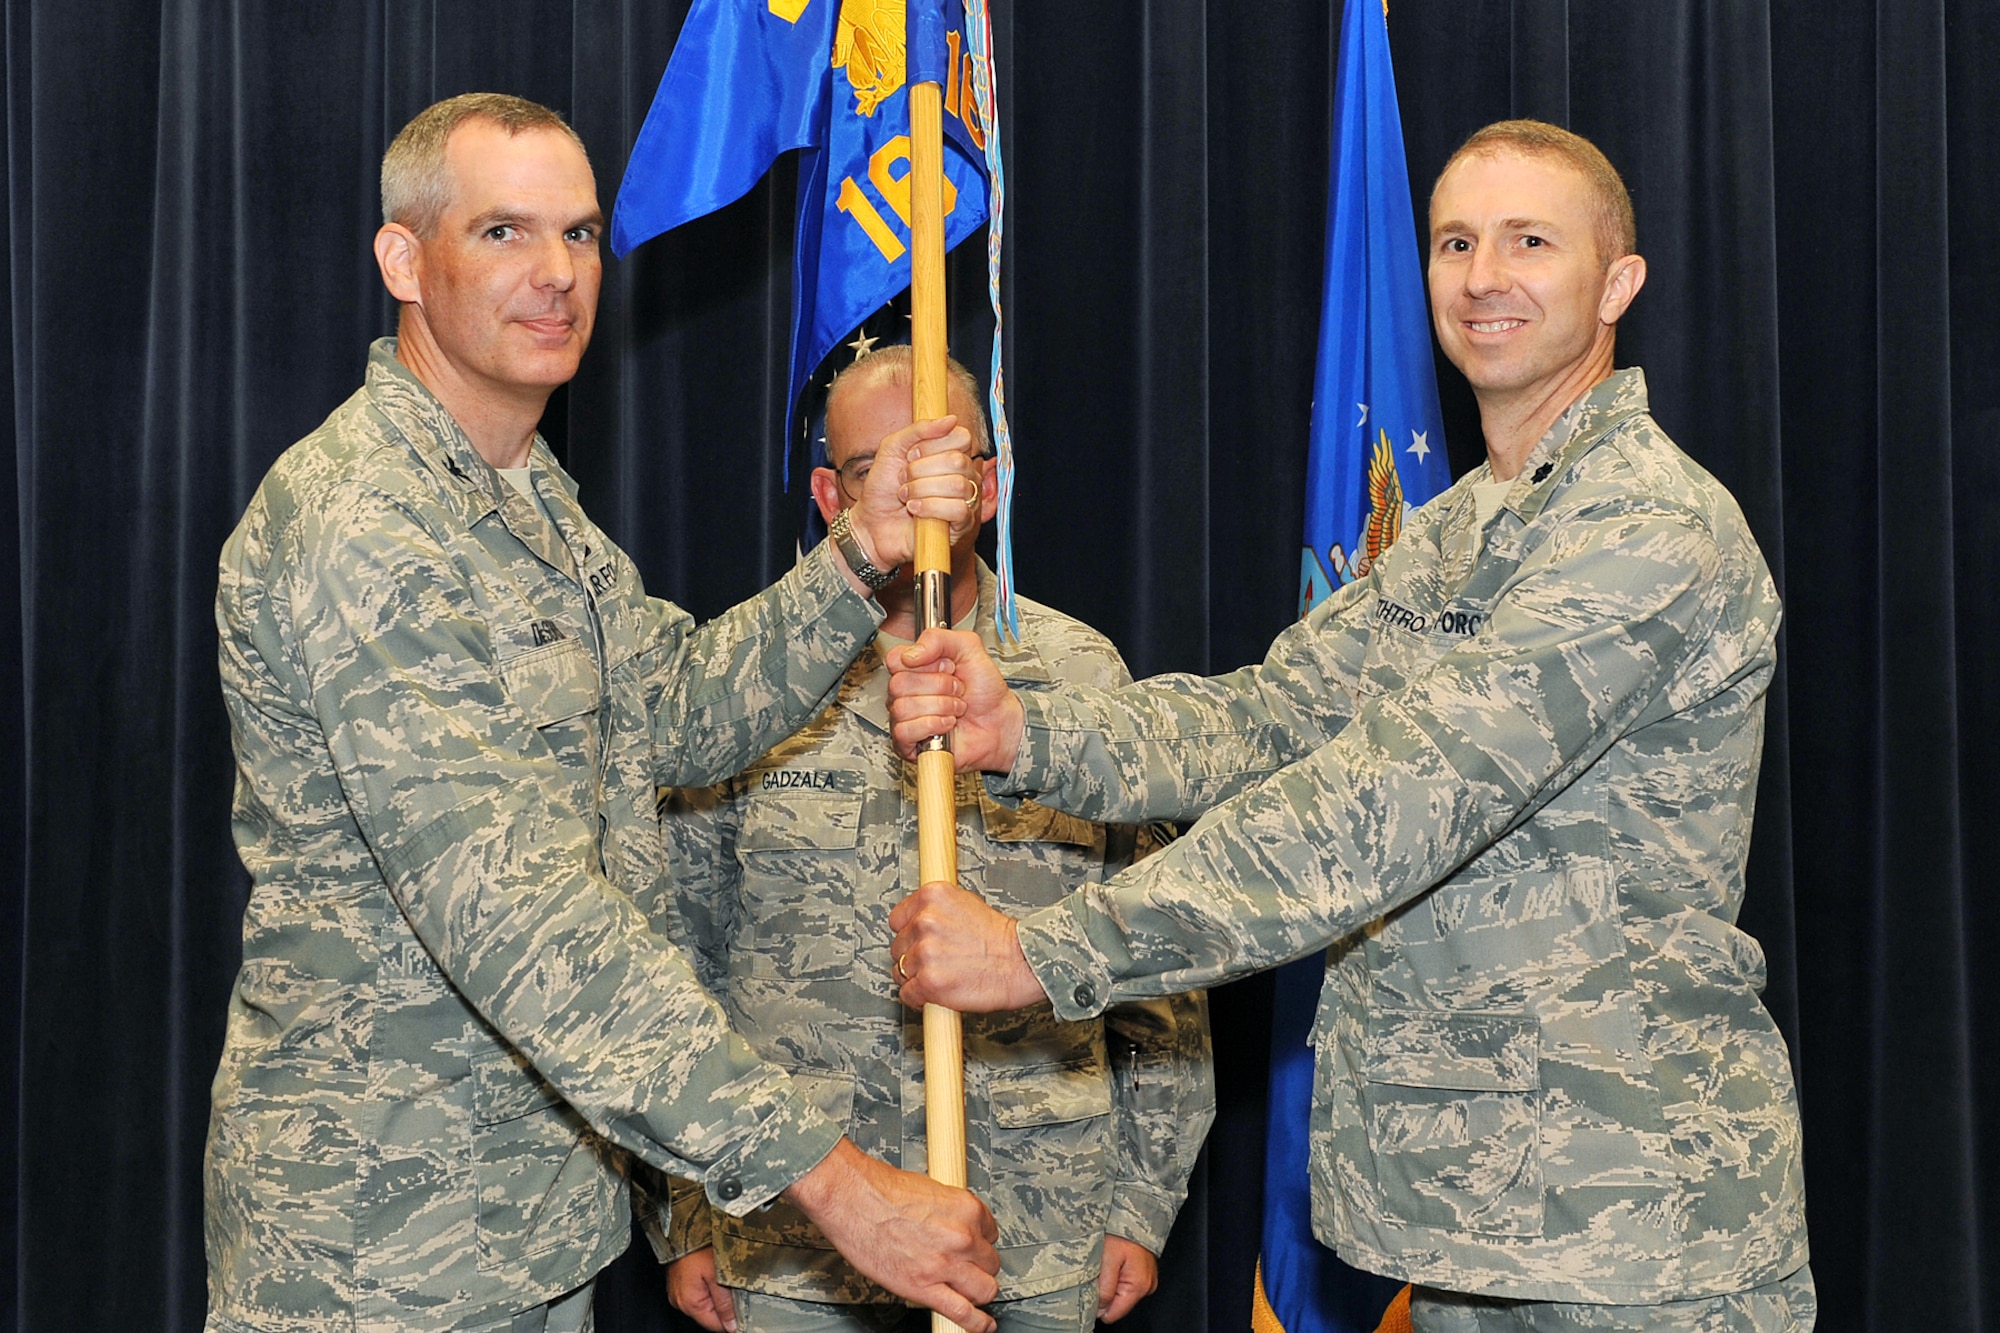 U.S. Air Force Col. Steven DeSordi, 2nd Weather Group commander, passes the guidon to Lt. Col.  Christopher Smithtro, incoming 16th Weather Squadron commander, during a change of command ceremony inside the Air Force Weather Agency auditorium on Offutt Air Force Base, Neb., on July 11. 

(U.S. Air Force Photo by Charles Haymond/Released)
